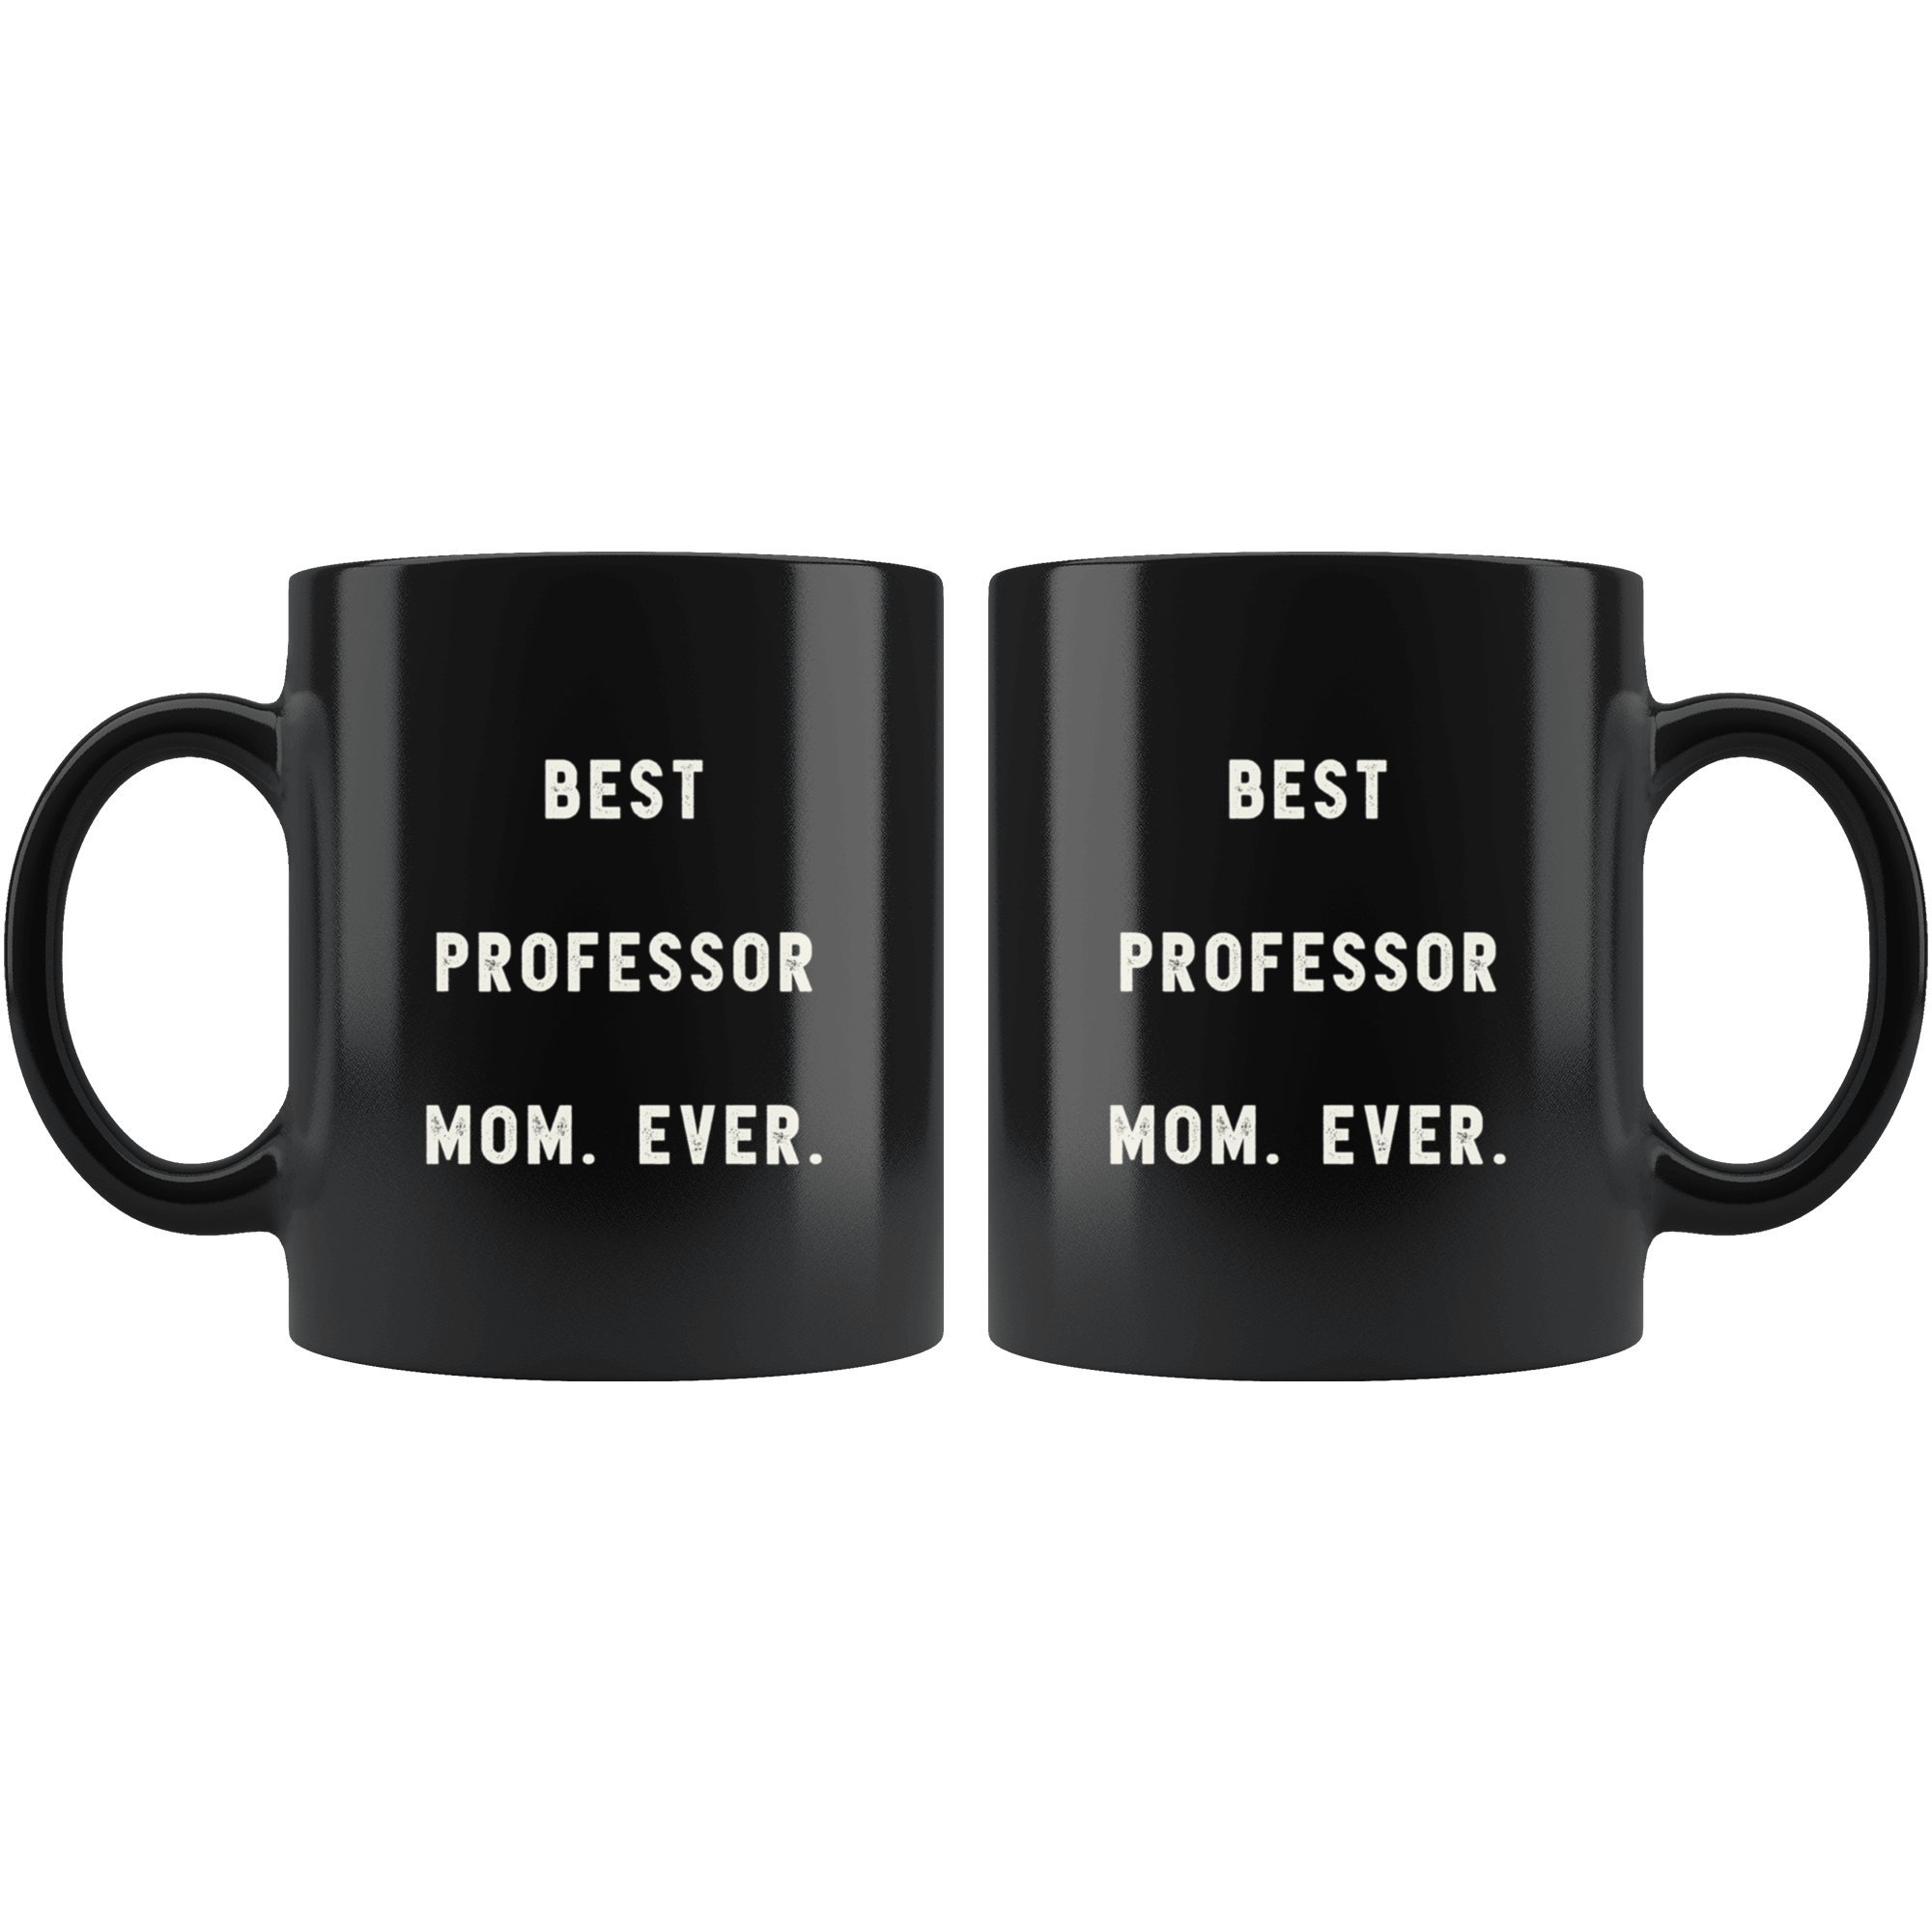 Best Professor Mom. Ever. The Funny Coworker Office Gag Gifts